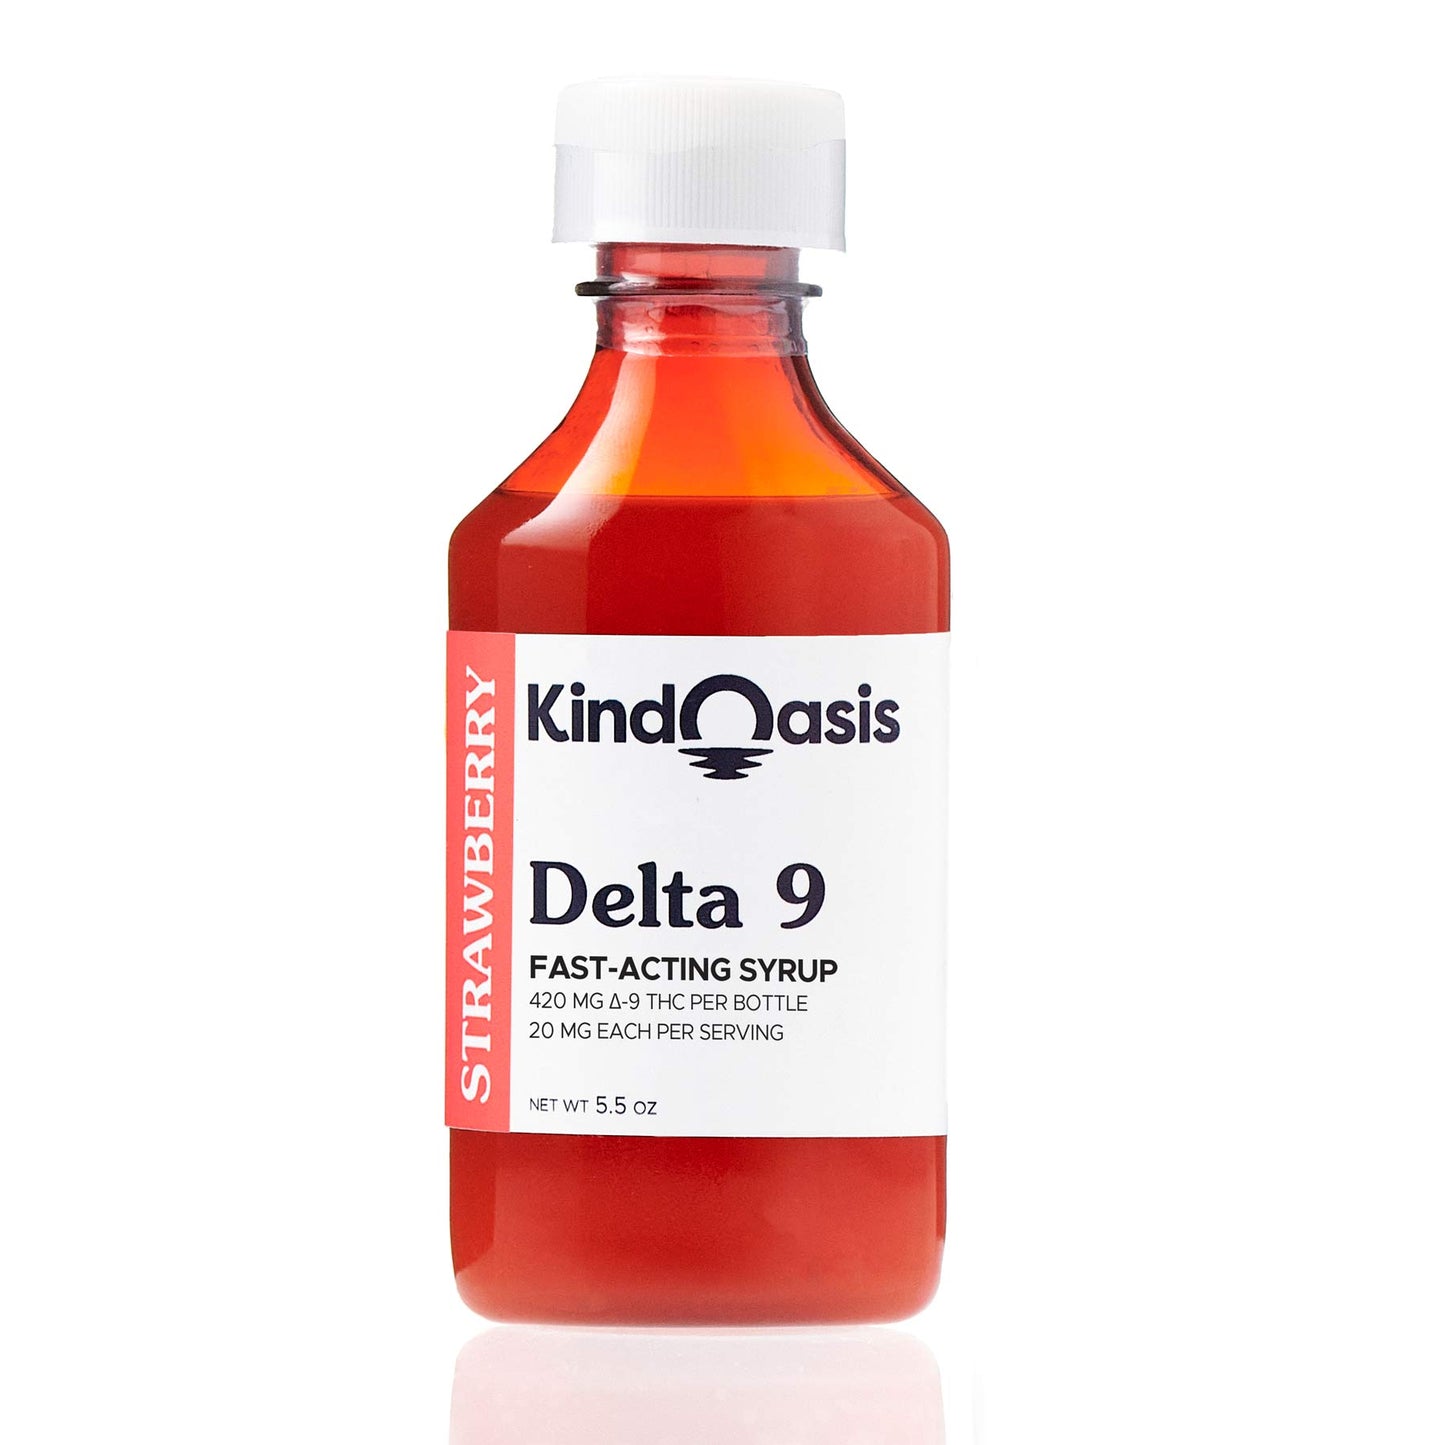 Kind Oasis Delta 9 THC simple syrup